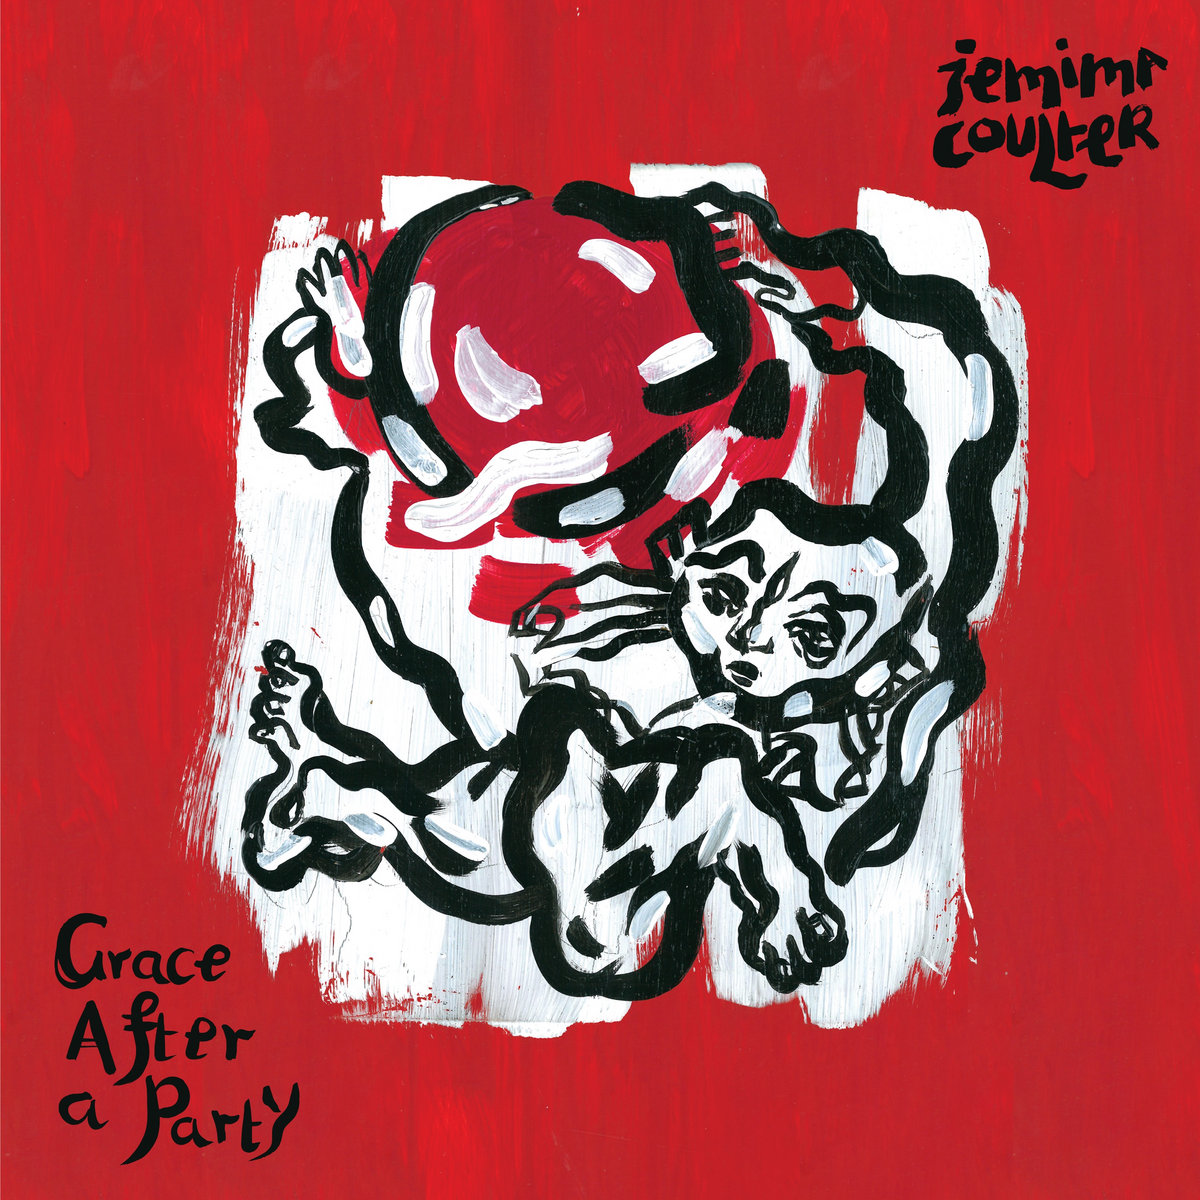 jemima coulter grace after a party album art - painting of an abstract figure on a red background